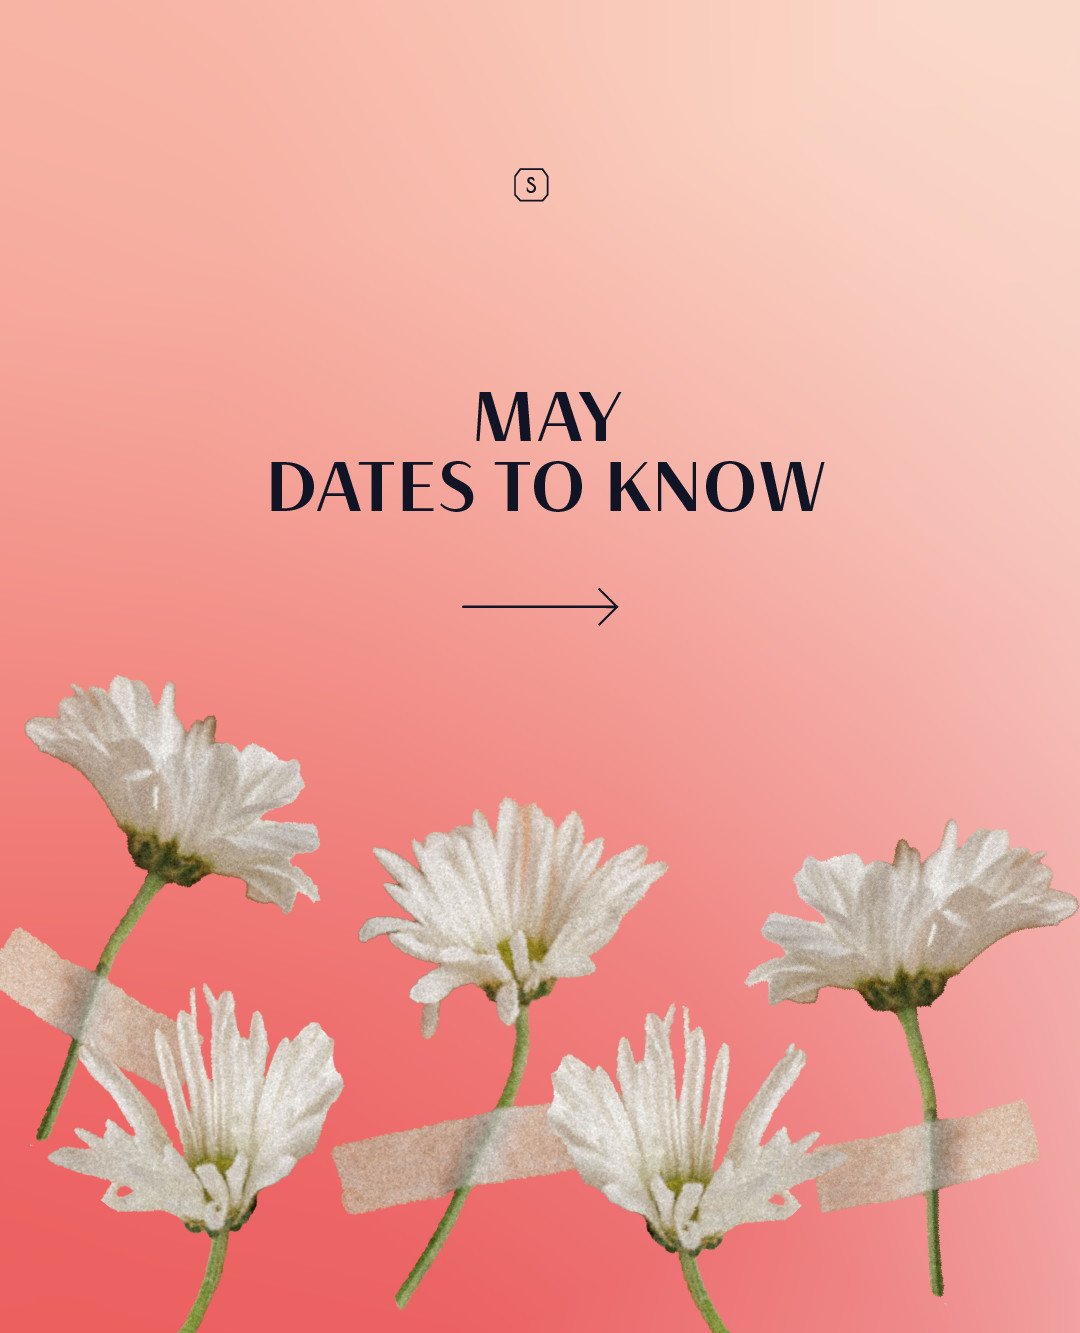 Content ideas are springing up like May flowers! 🌼

Here's our list of May dates to know to help keep your content calendar fresh as a daisy. Which one of these are you adding to your strategy ASAP?

[content strategy, social media managers, content